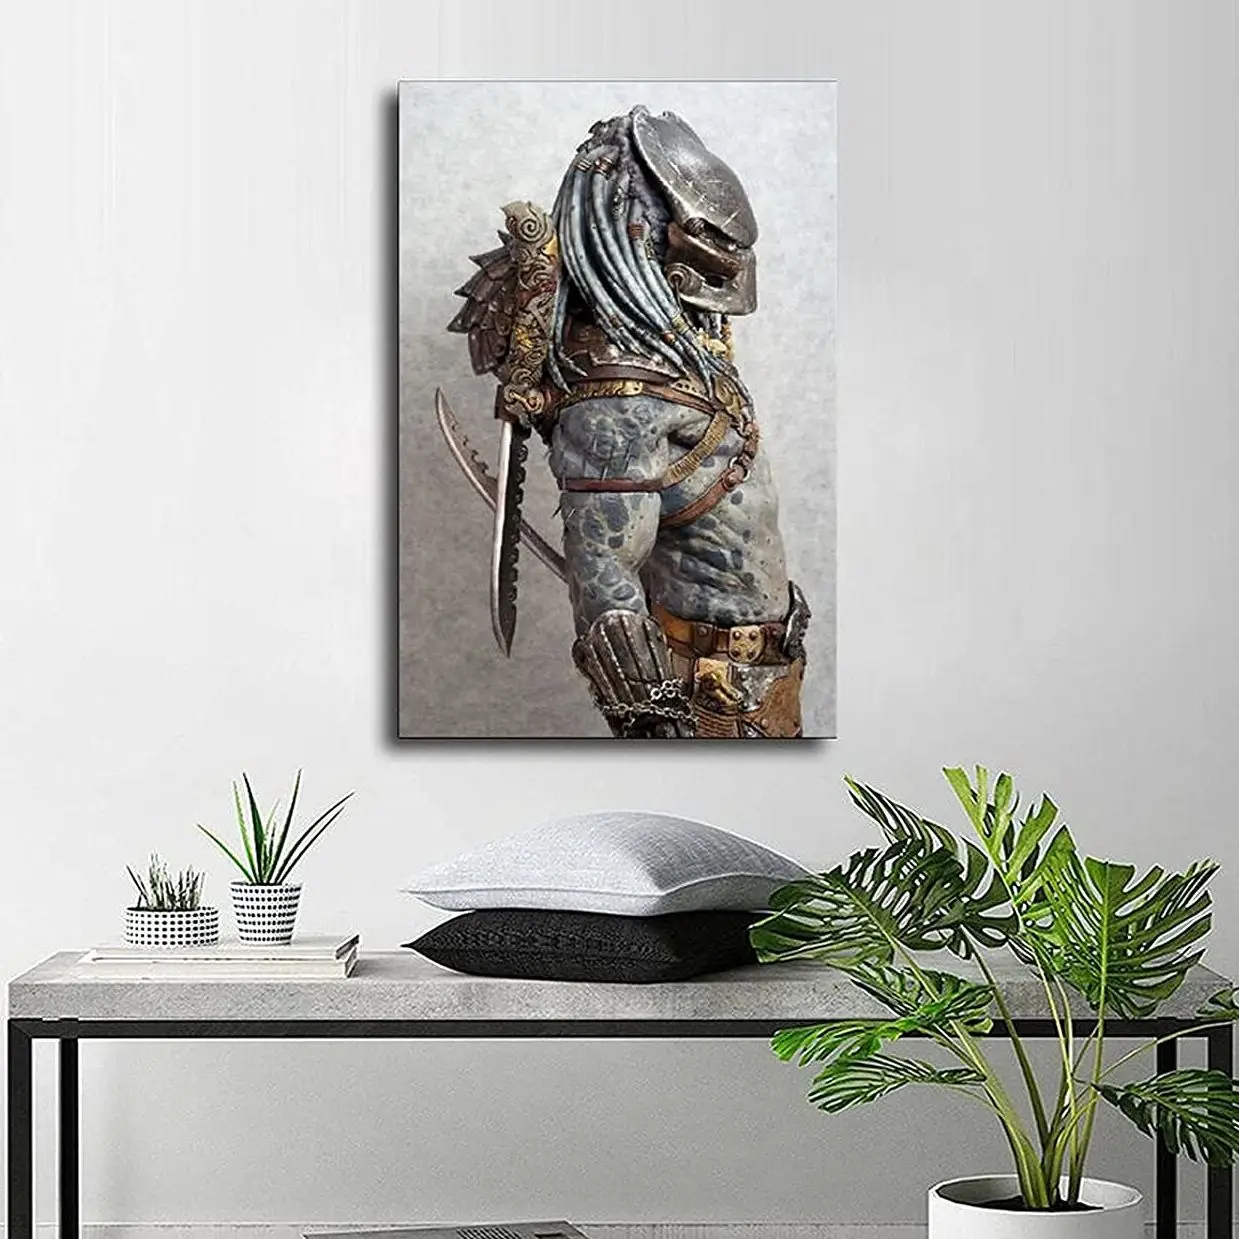 

Alien vs Predator Game Play Room Wall Art Canvas HD Decorative Printed Posters Oil Paintings for Living Room Home Decor Pictures